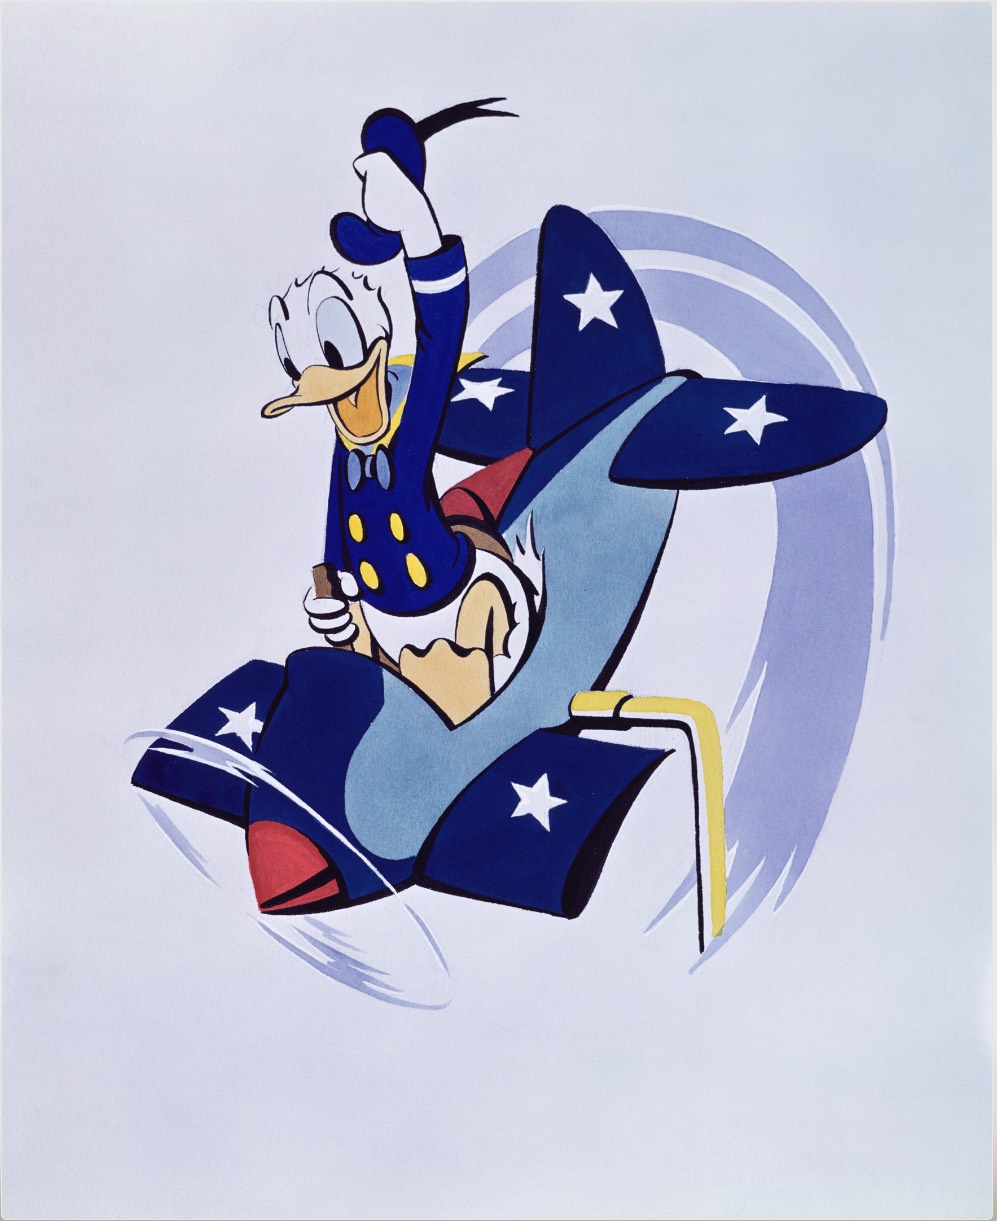 Cartoon illustration of Donald Duck in an airplane.